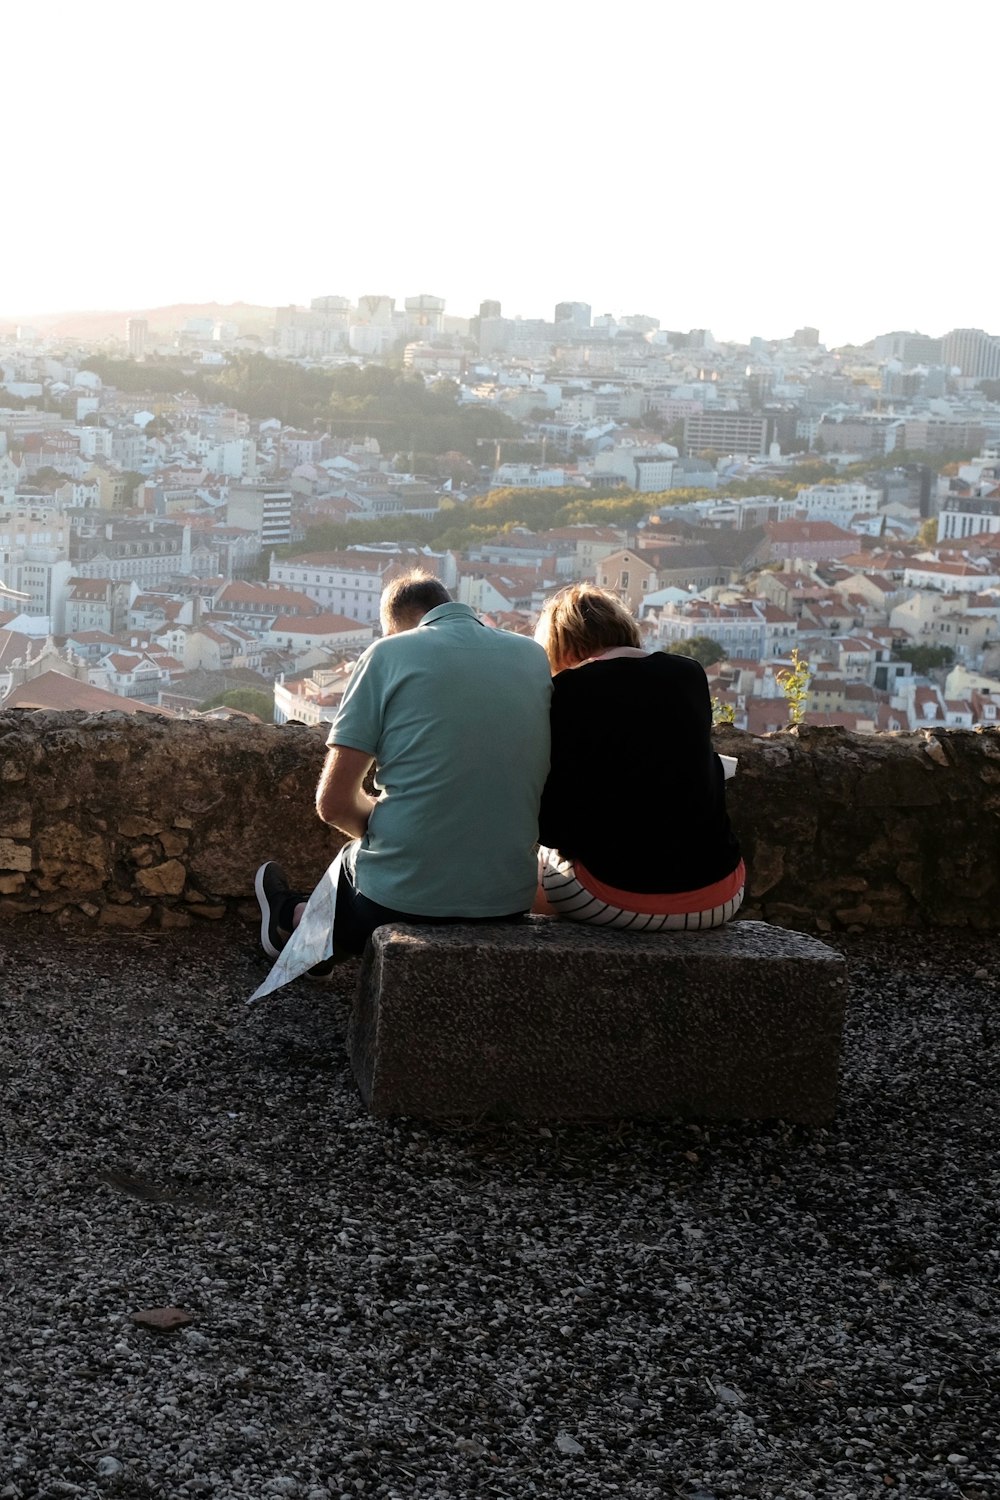 two people sitting on a stone bench overlooking a city